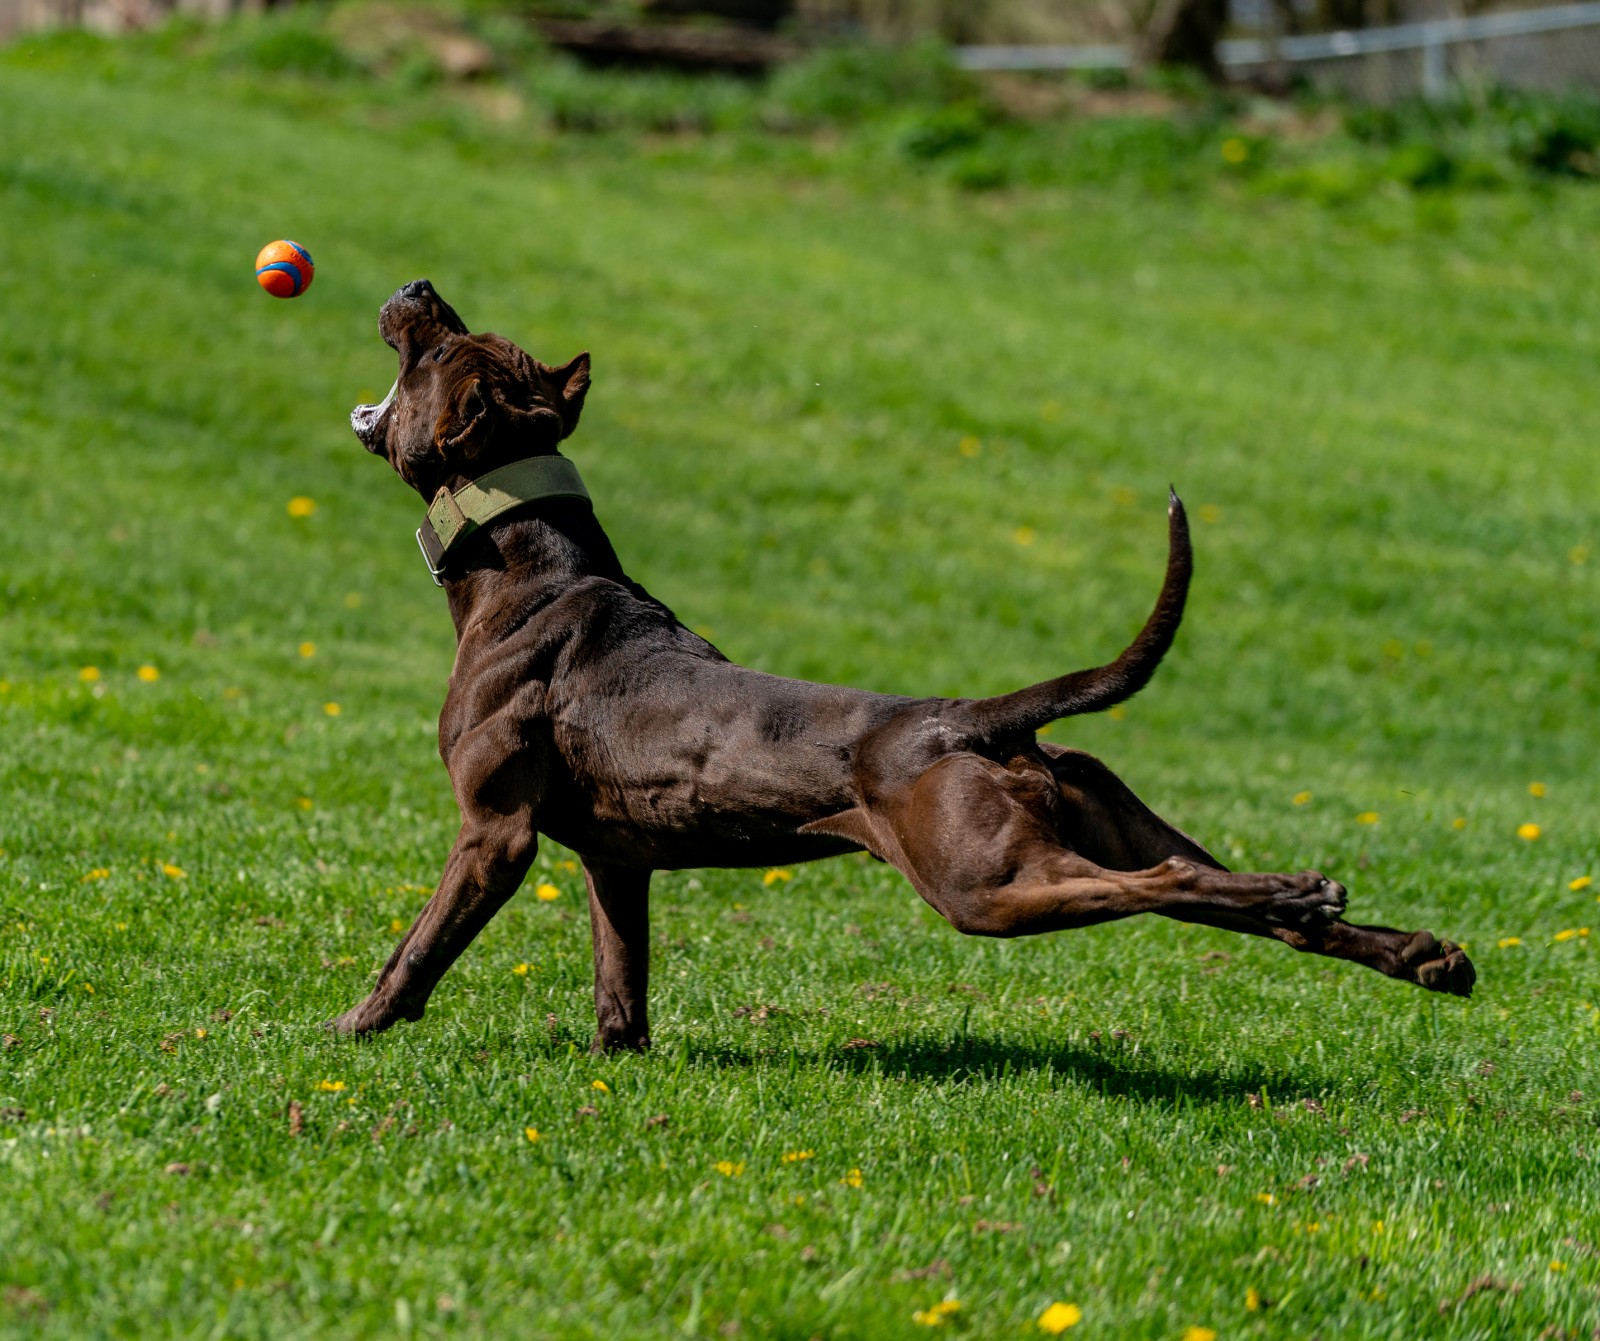 Unleashed Kennelz XL black pit bull Hitman looking like a stallion in this photo as he strides out after a ball. 